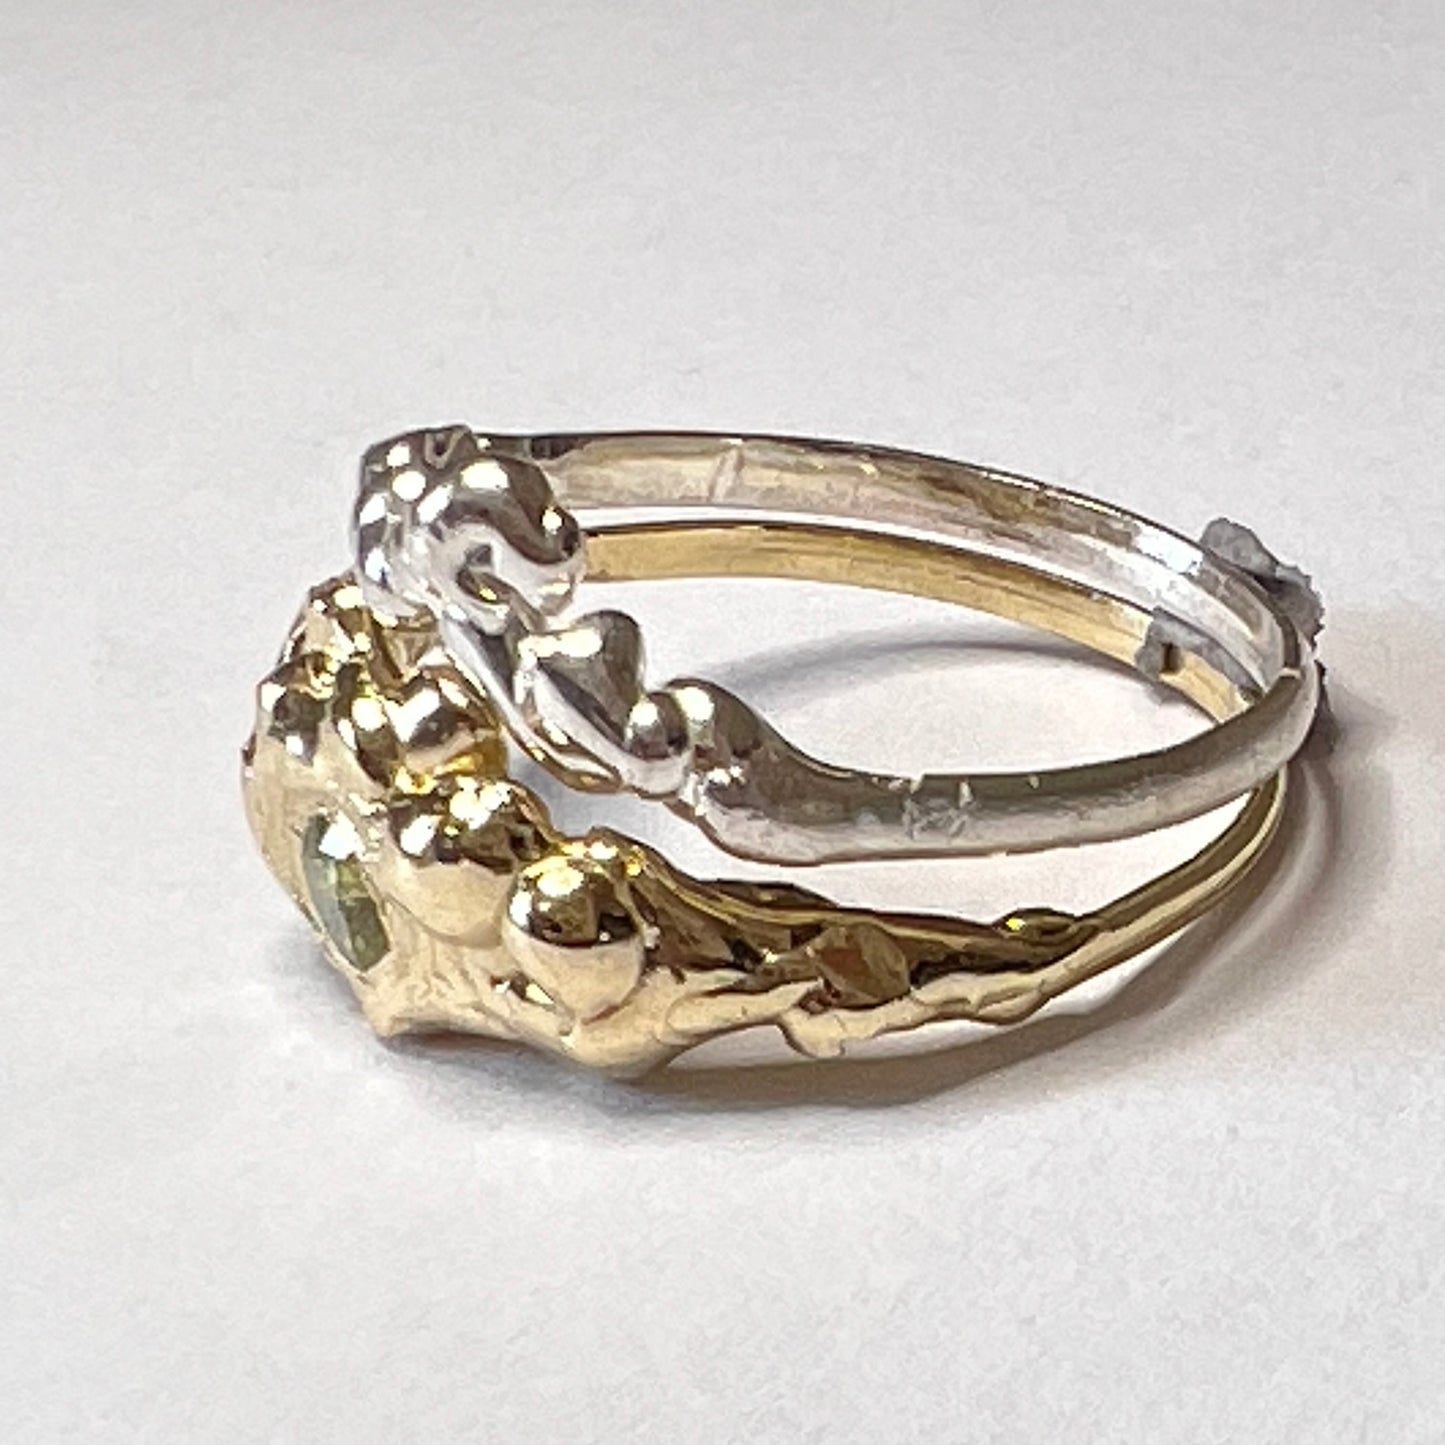 Rings | Finger Adornment | Gold and silver stackers